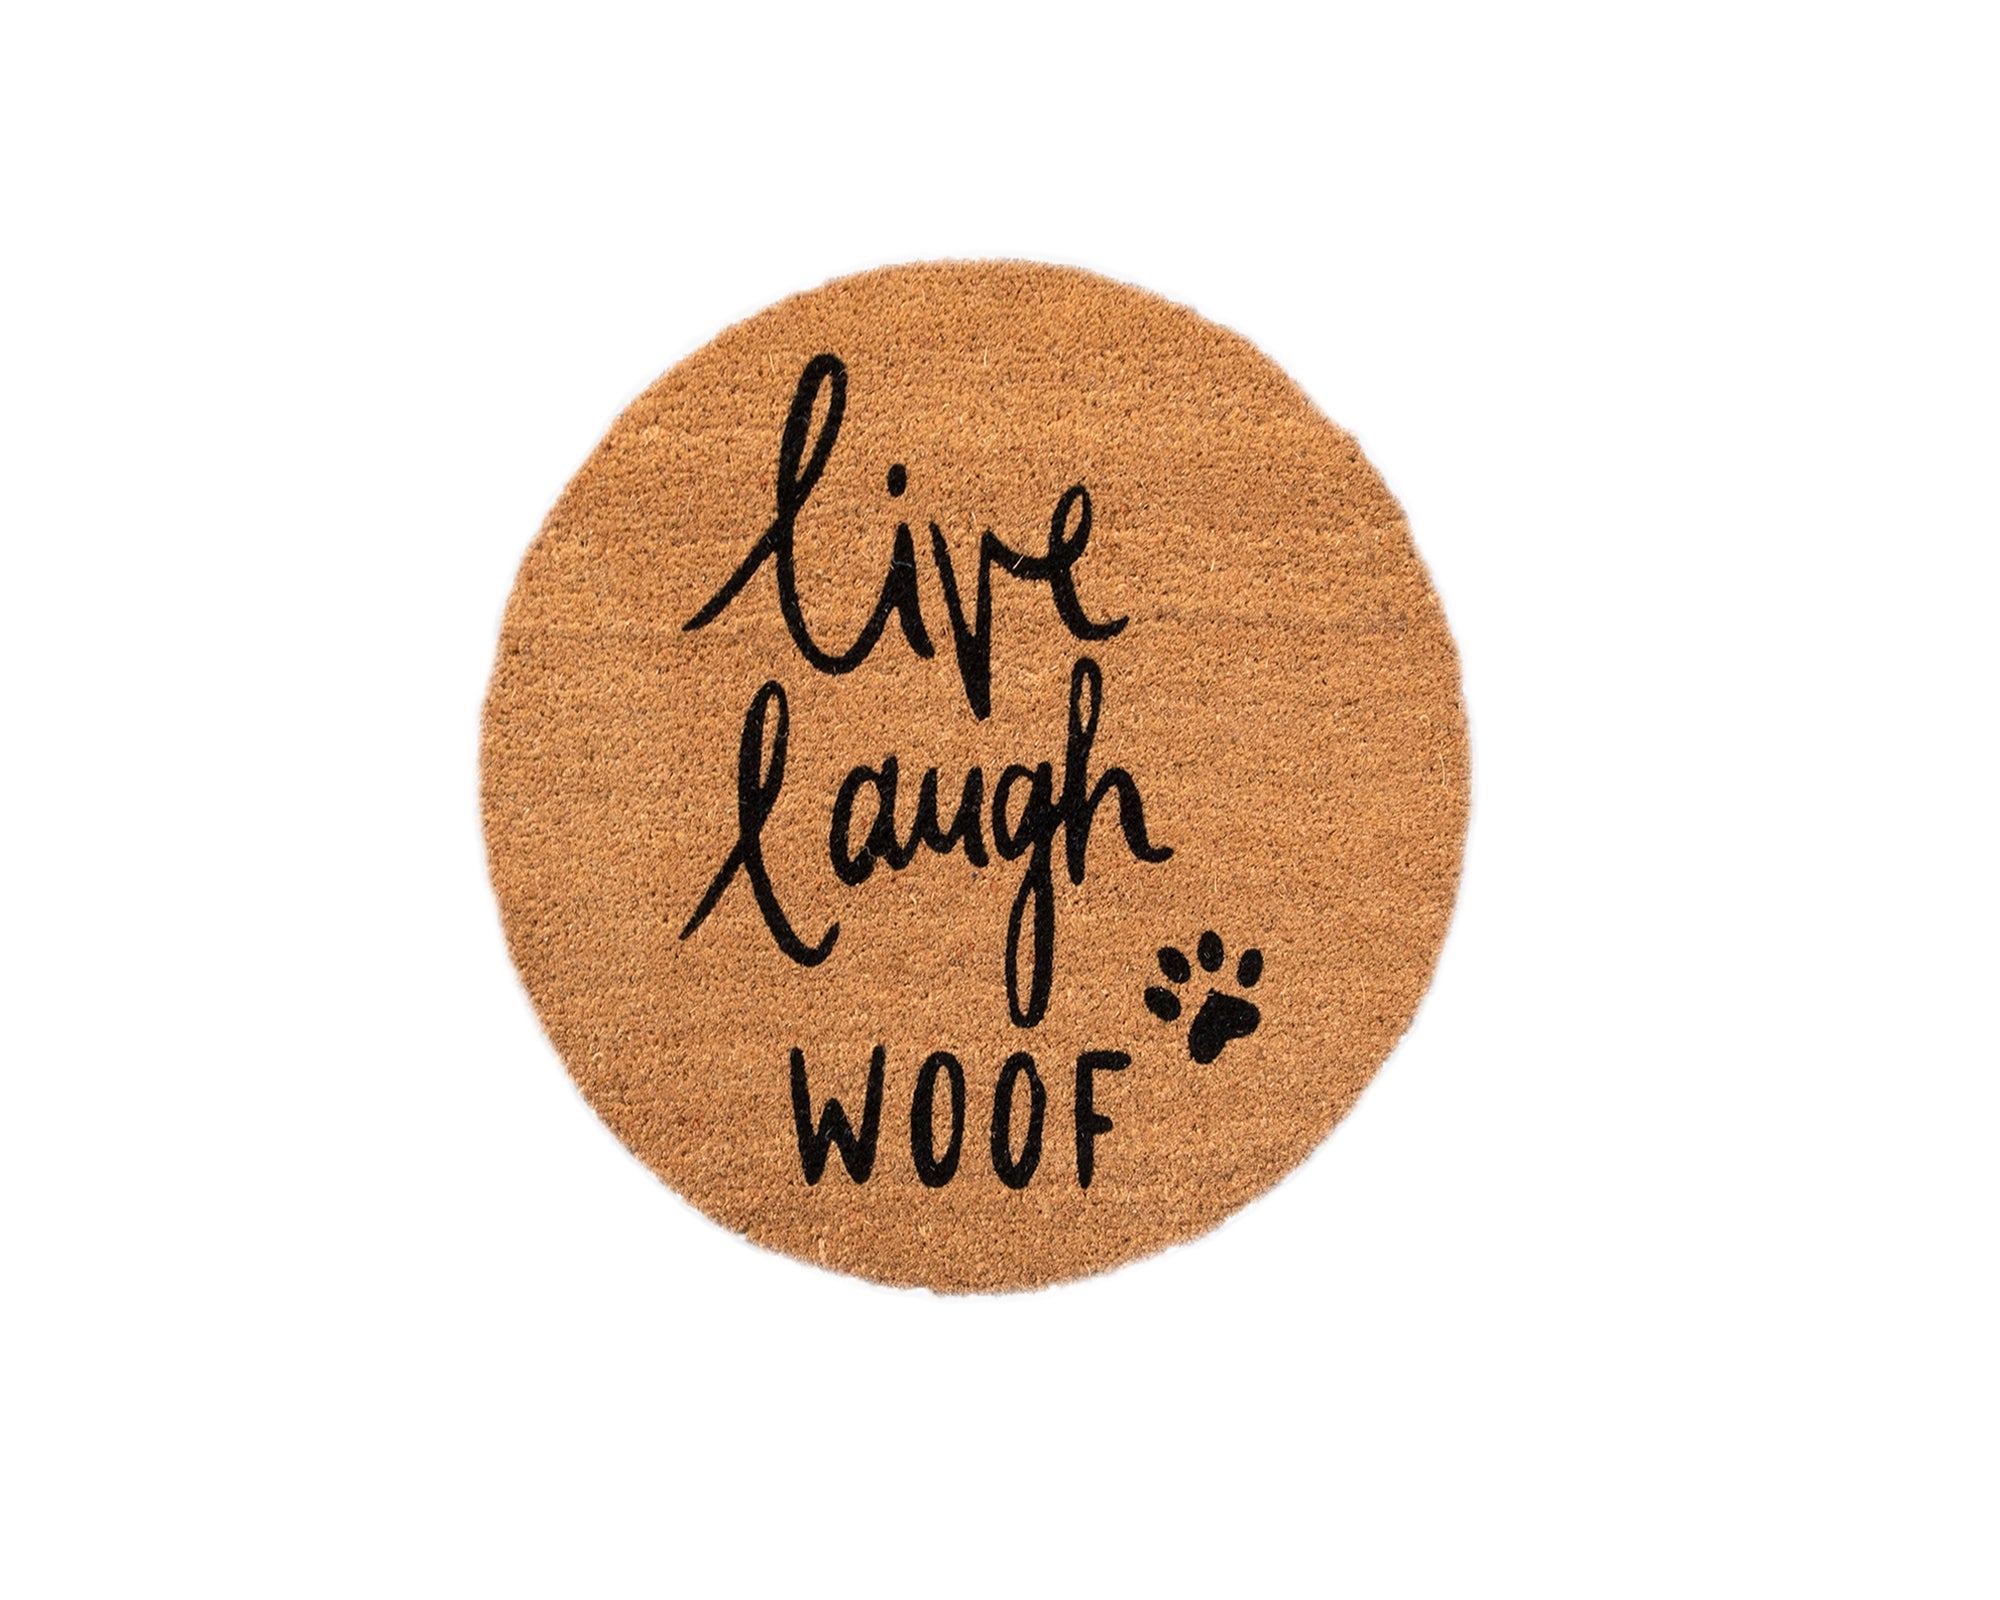 4CatsnDogs- Convertible Entrance Mat " Live, Live, woof"